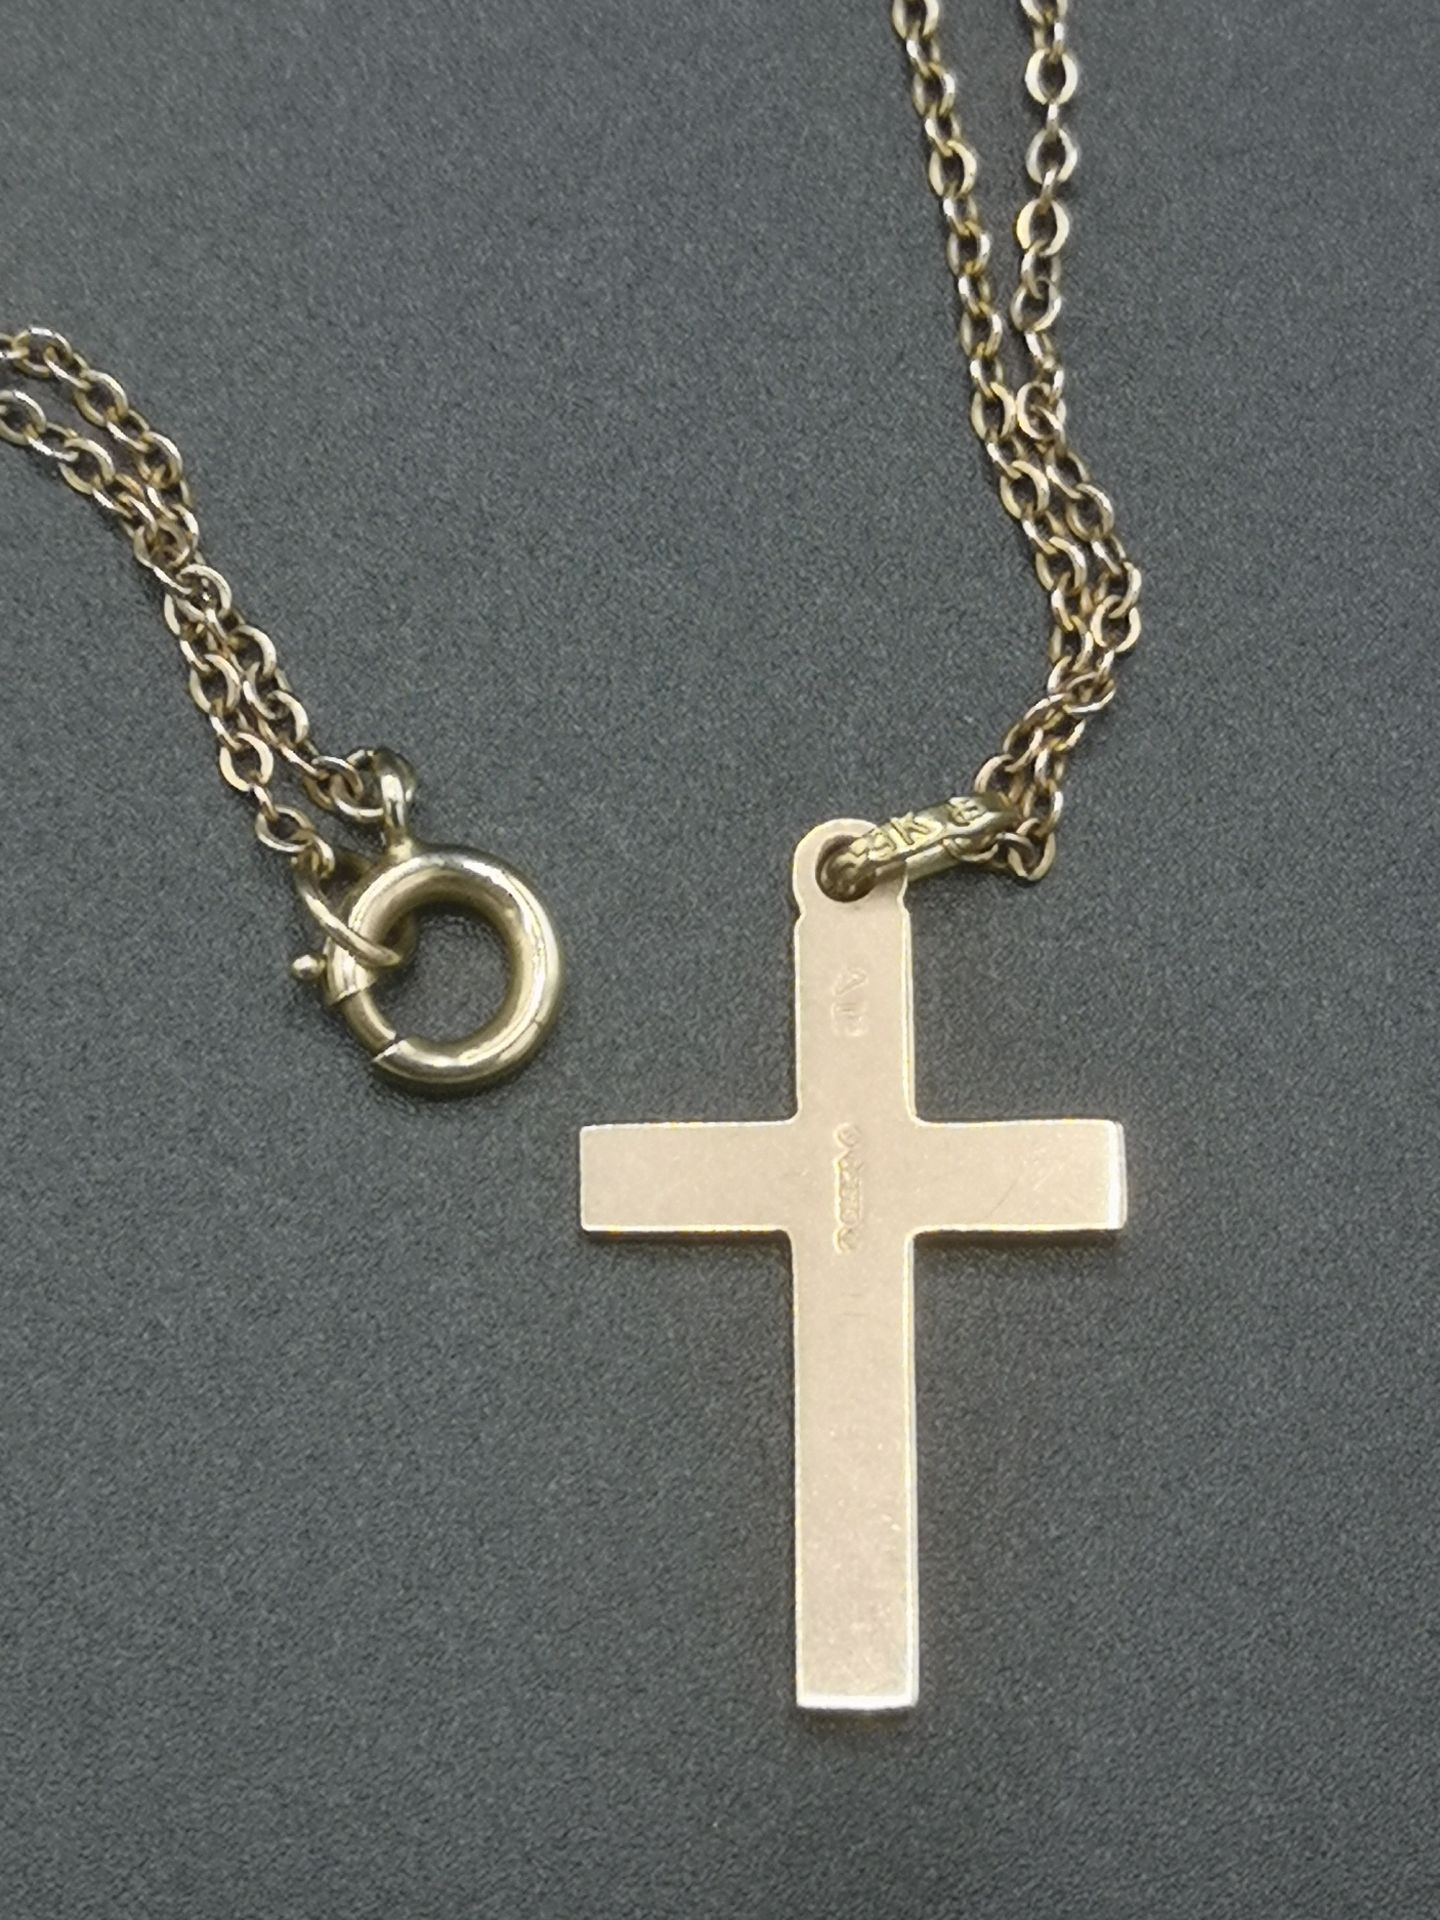 9ct gold necklace with crucifix pendant - Image 4 of 4